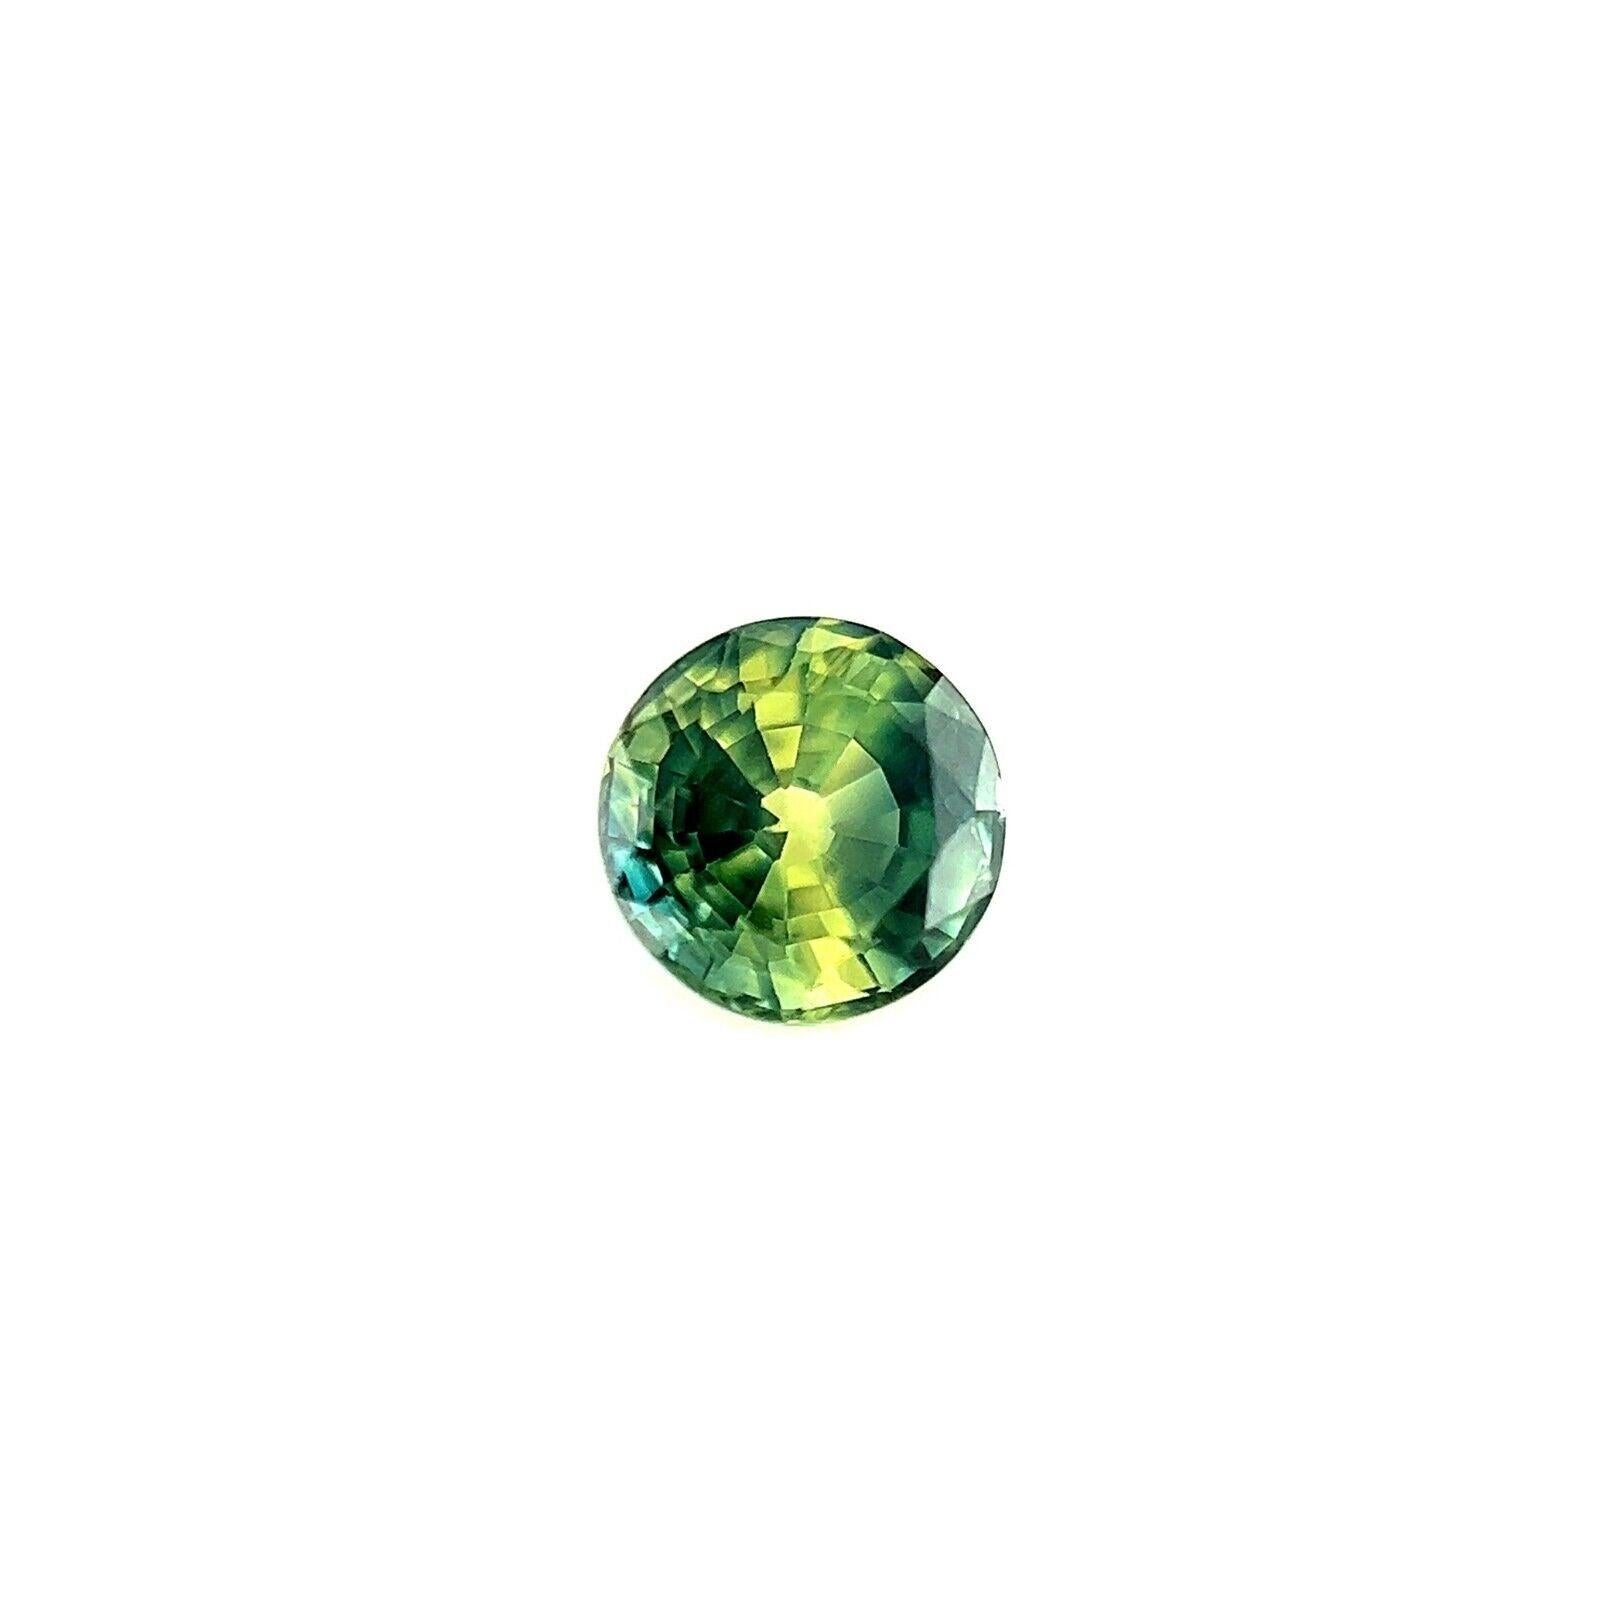 Unique Parti Bi Colour Sapphire 0.62ct Blue Yellow Green Round Loose Gem 4.8mm

Natural Greenish Yellow Blue Parti-Colour/Bi colour Sapphire Gemstone.
0.62 Carat with a beautiful blue green yellow parti colour and good clarity, a clean stone with